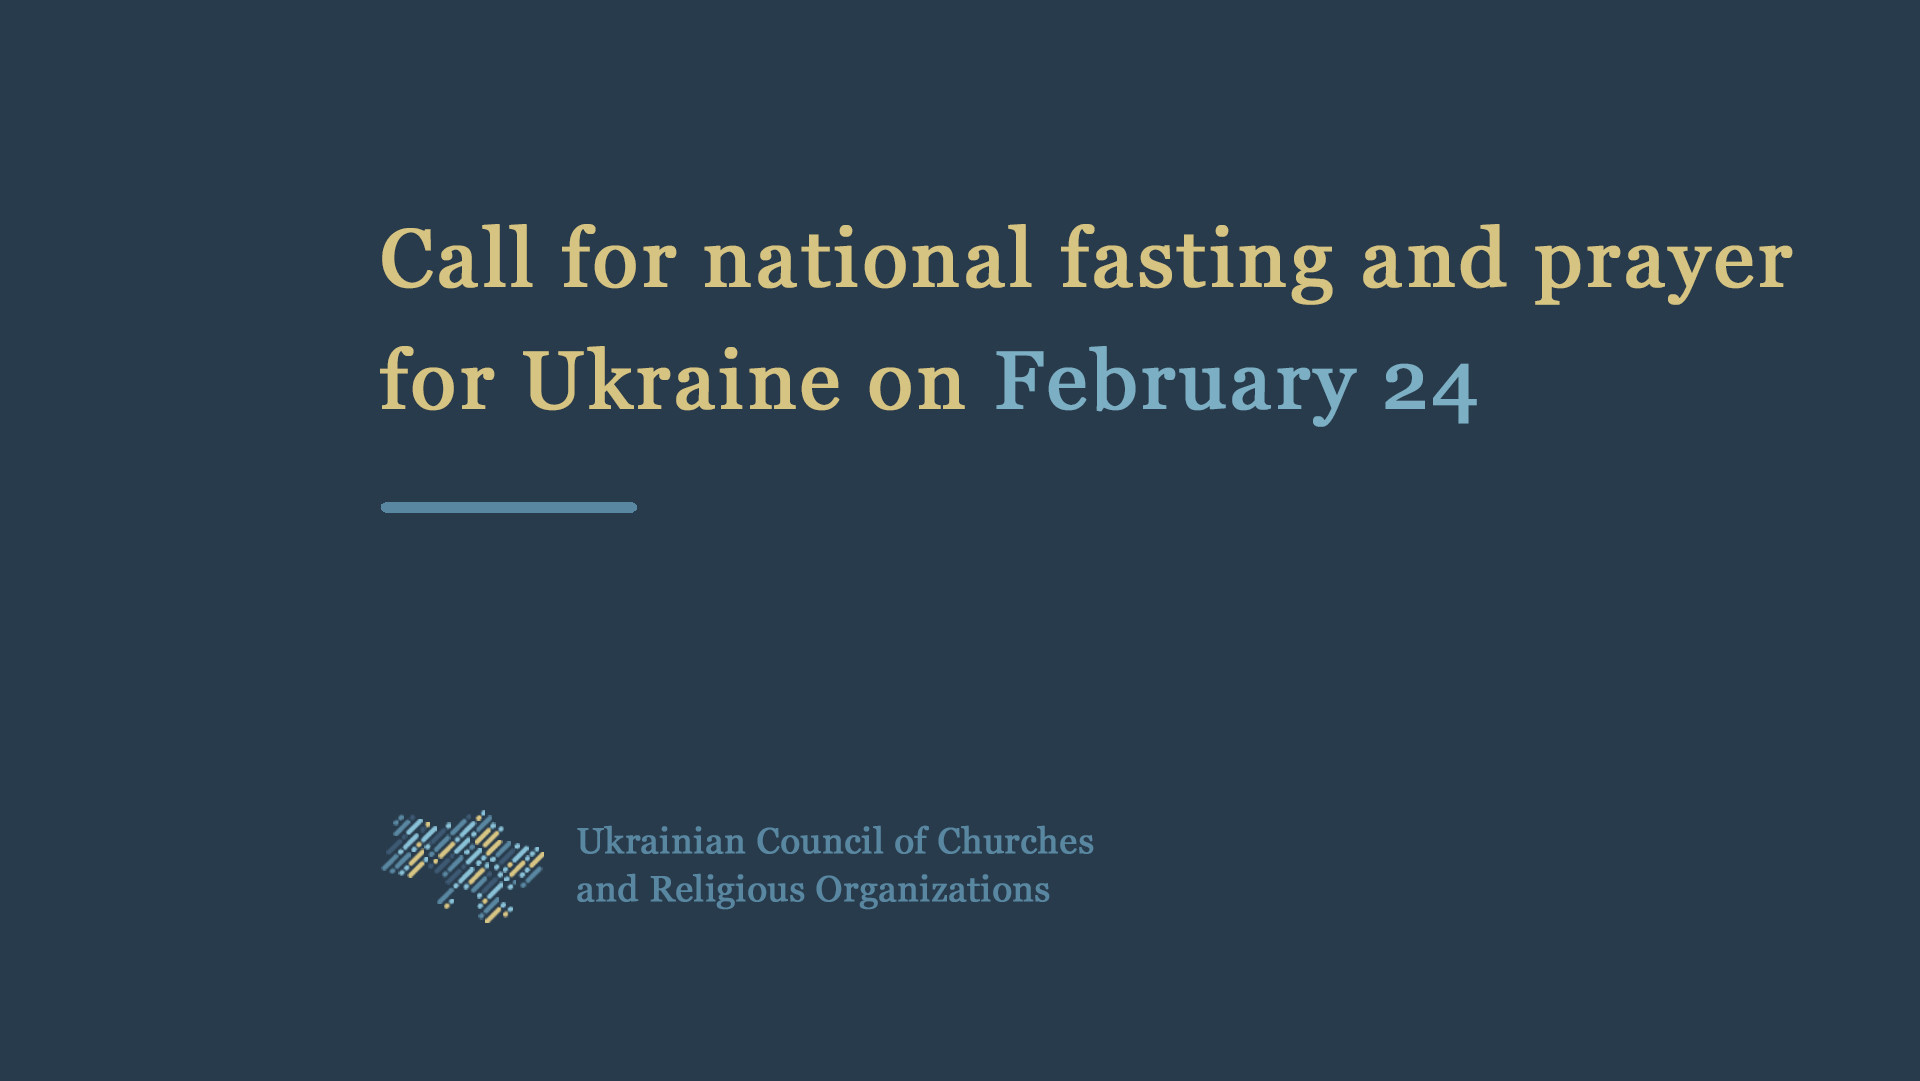 All of Ukraine will fast and pray on February 24 for victory and peace